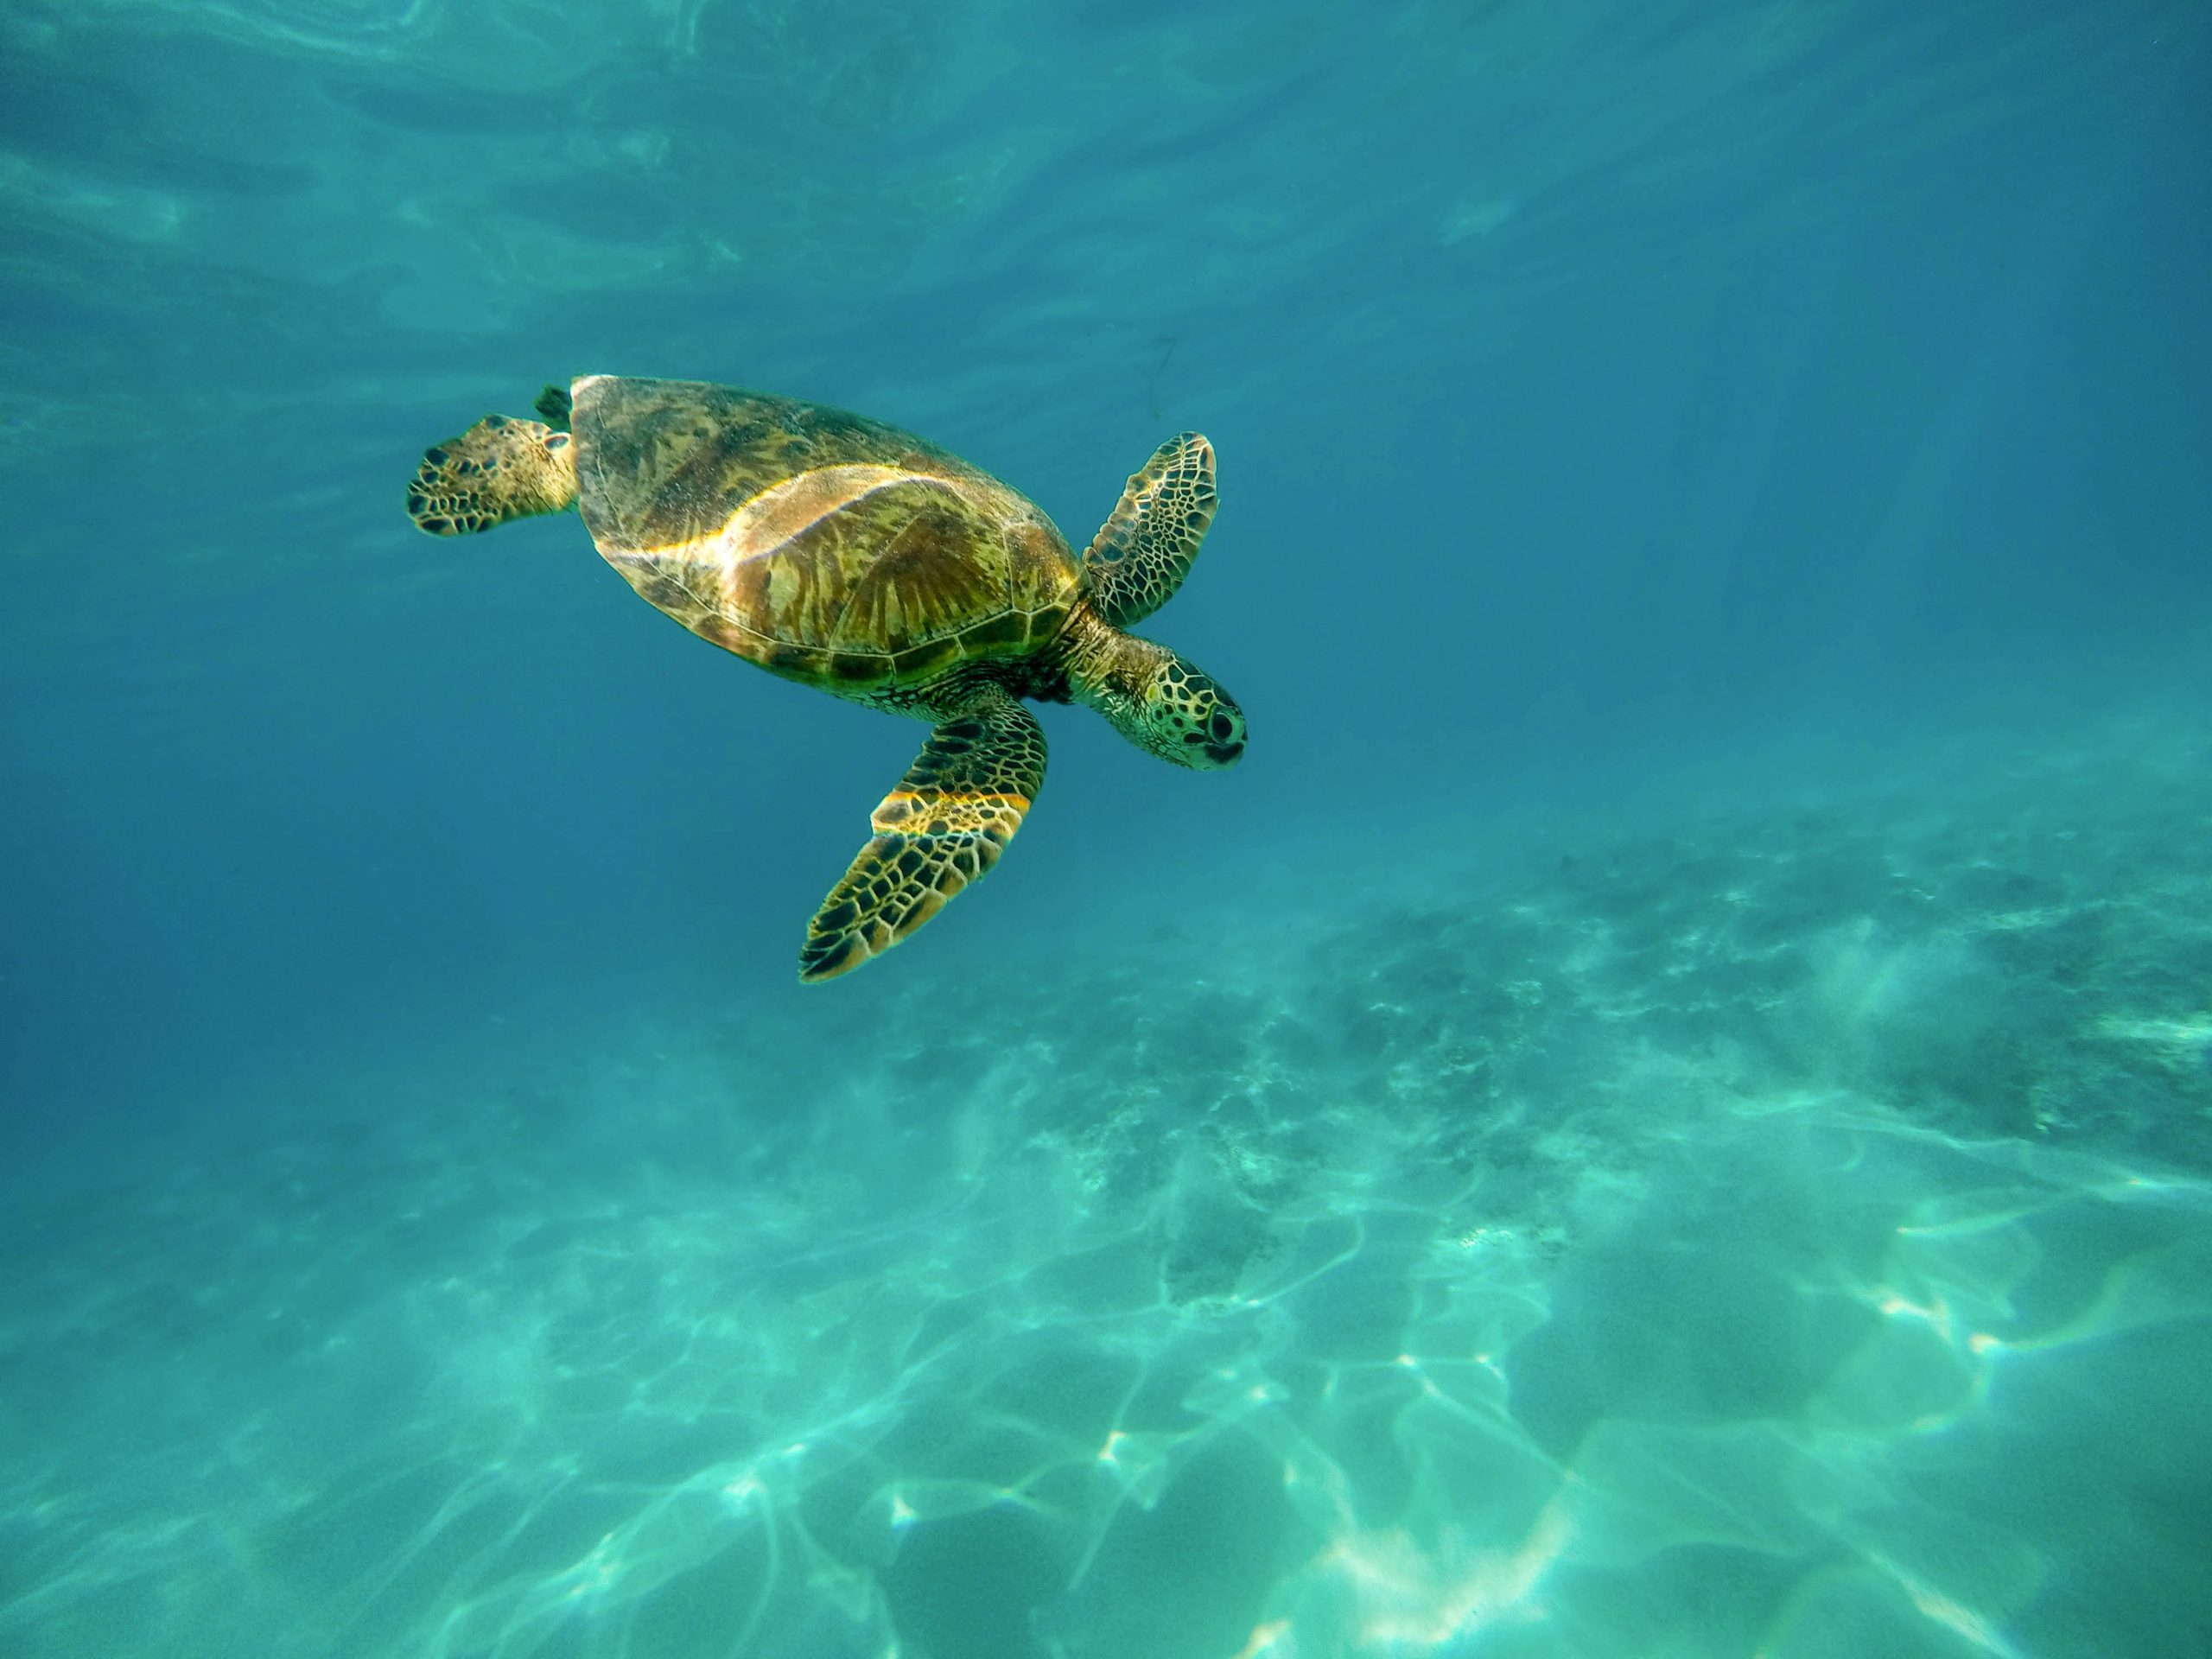 Sea turtle swimming down through clear blue water, front flippers stretched out. Rays of sunlight dance throughout